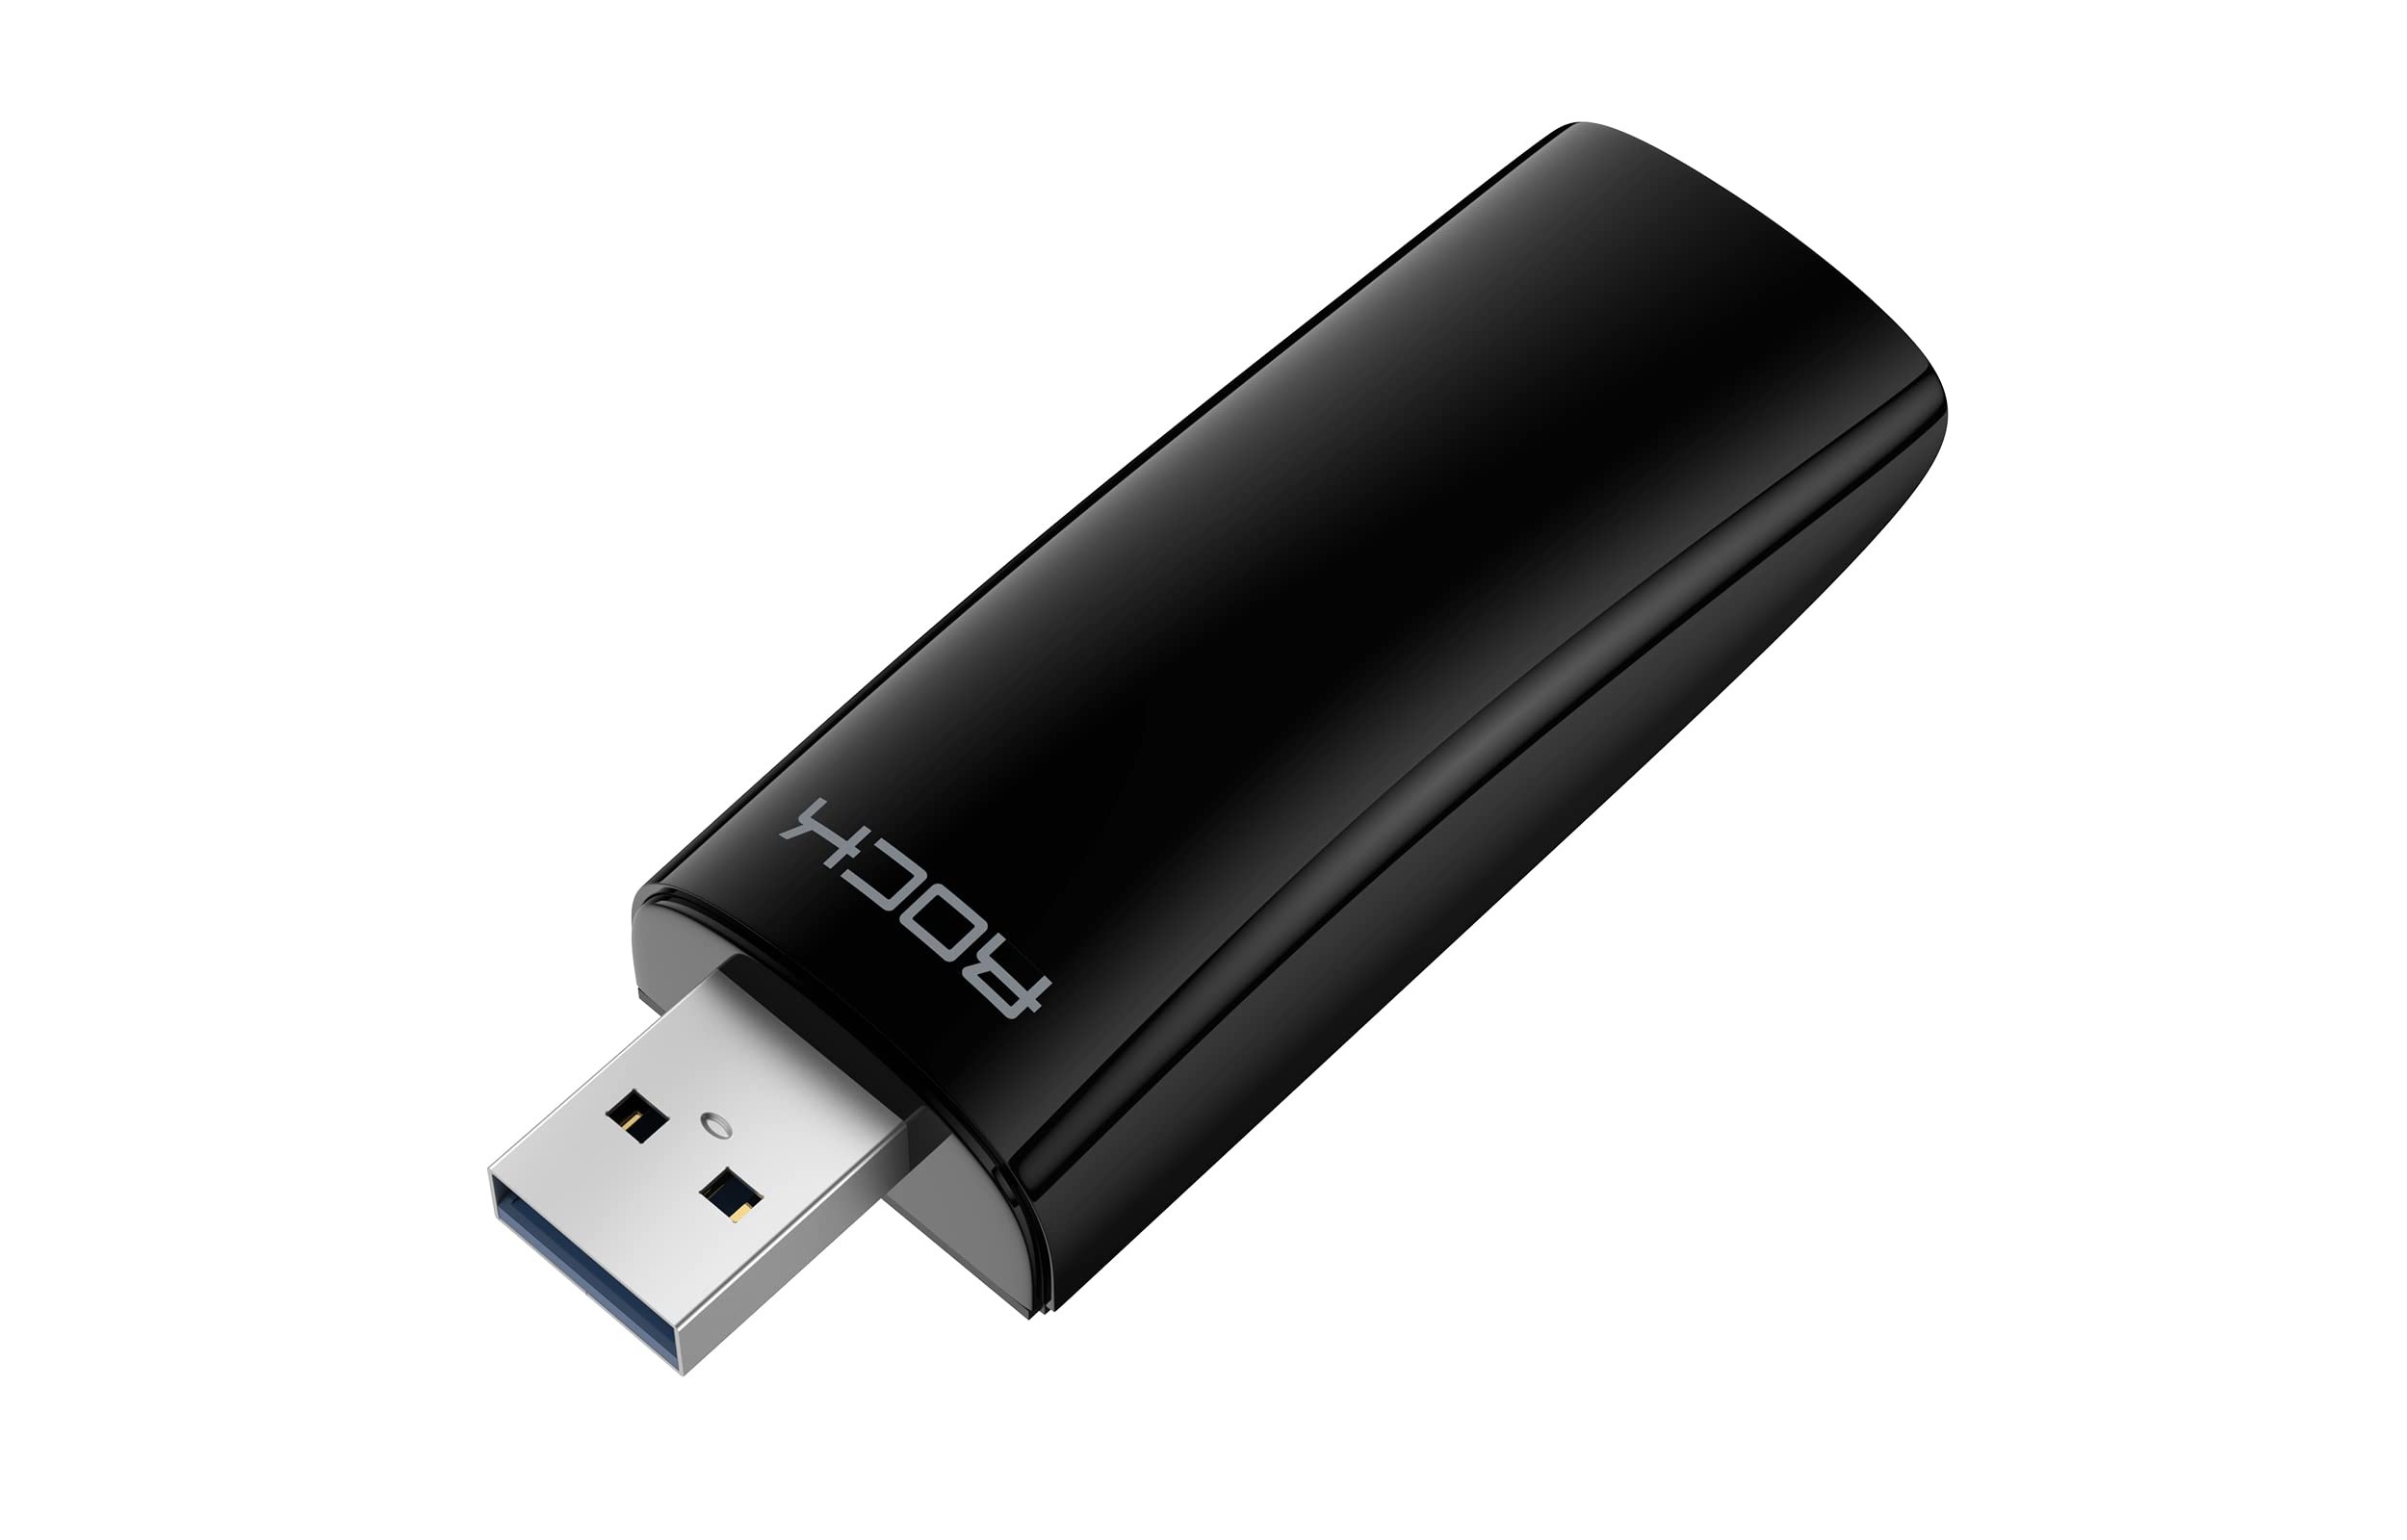 virtualizing-your-usb-dongle-key-for-convenience